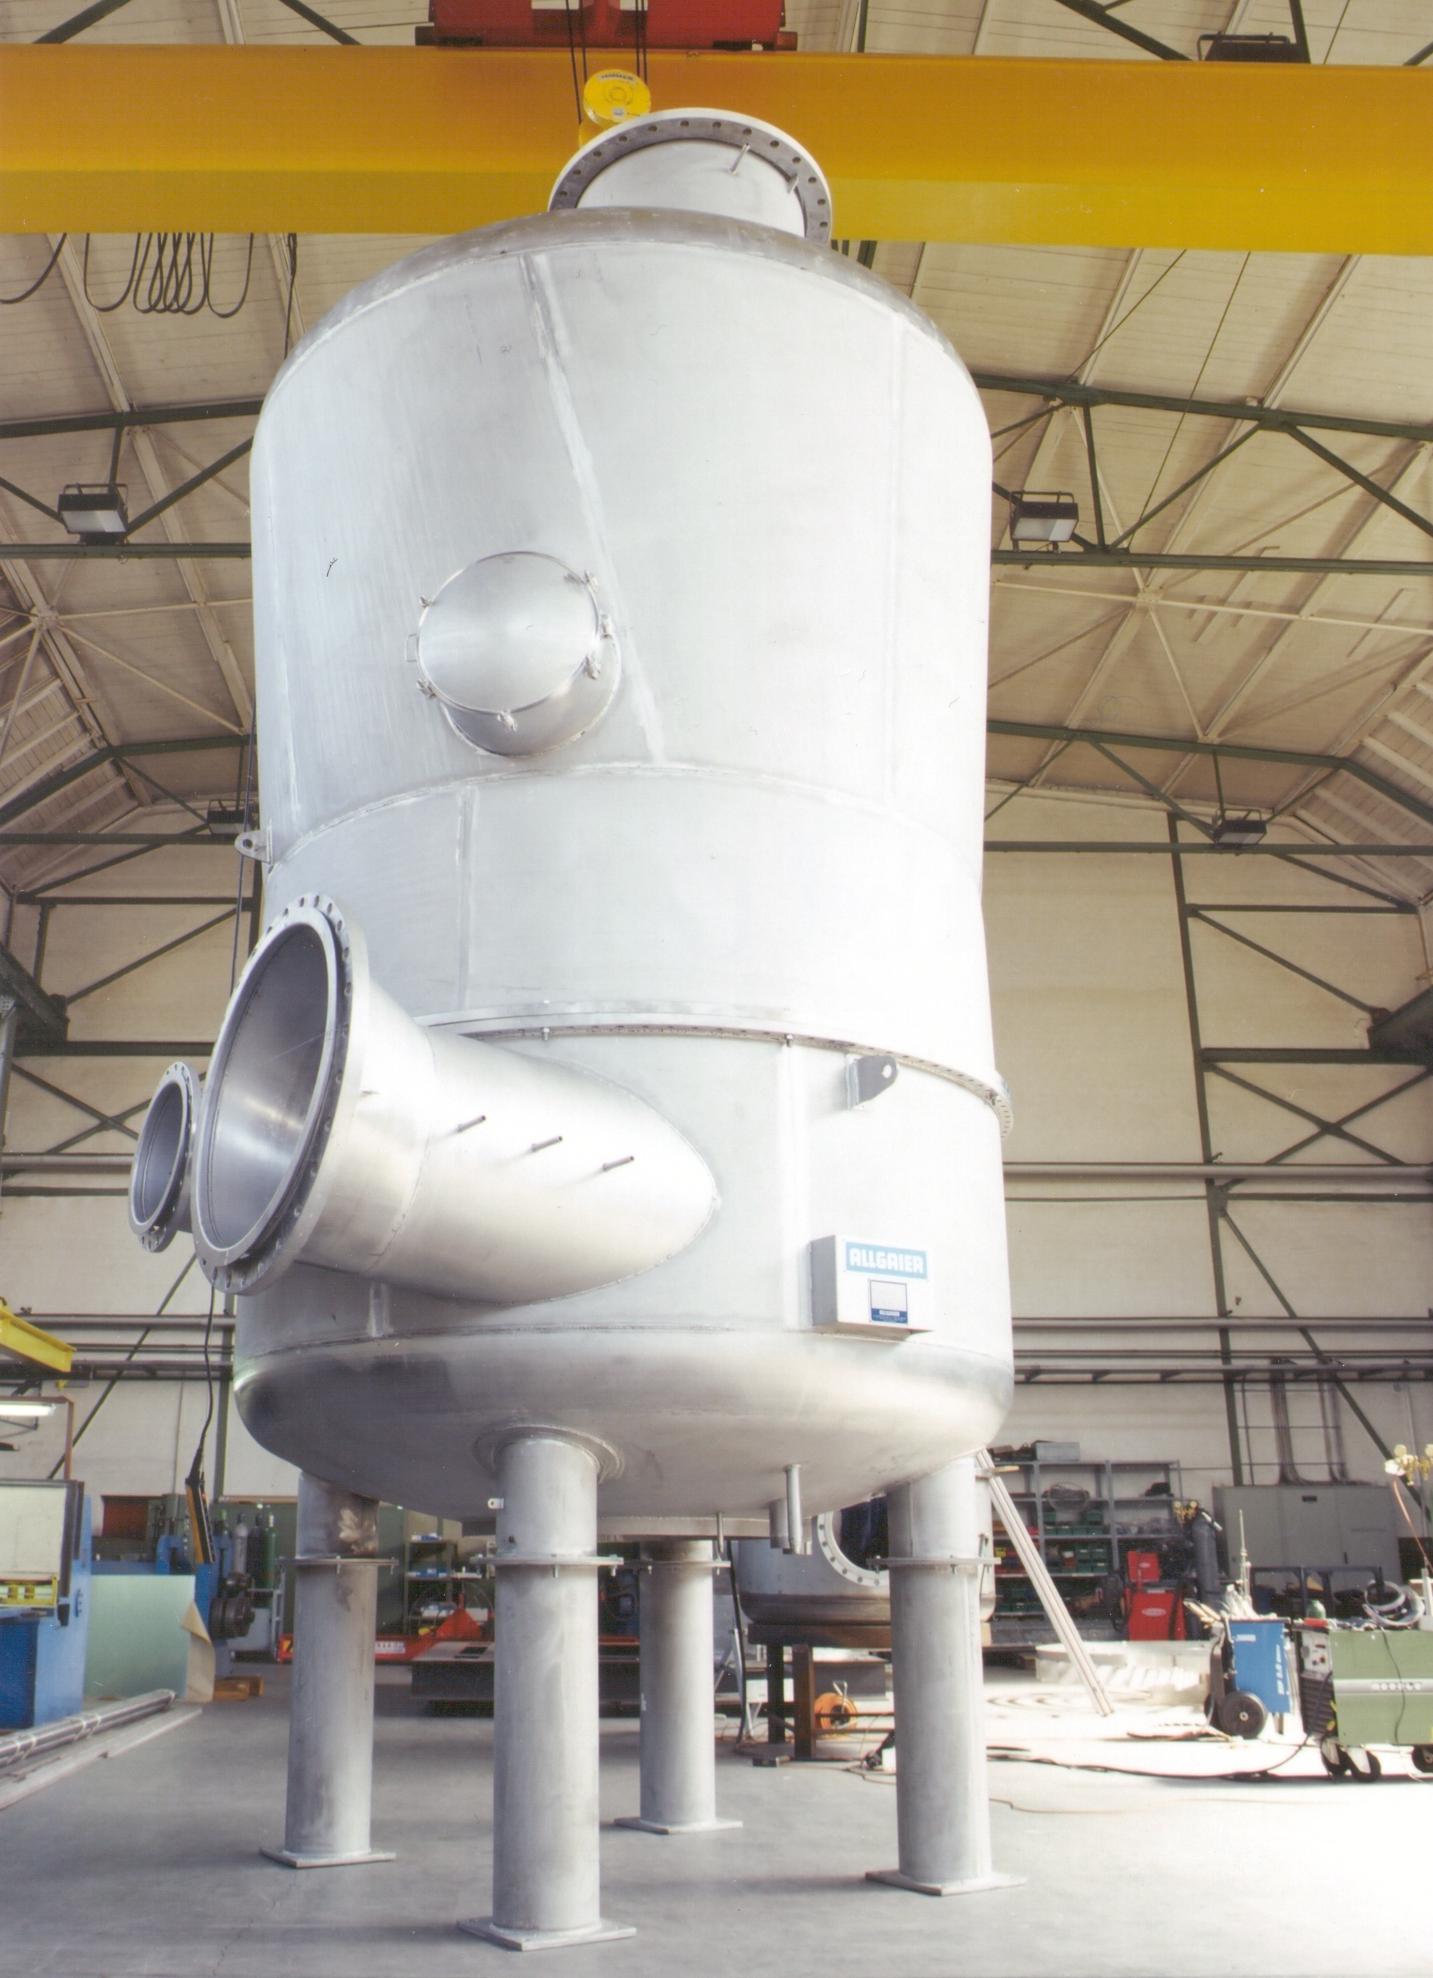 dispersion dryer for drying powders and fibers in a production hall | © Allgaier Process Technology 2022